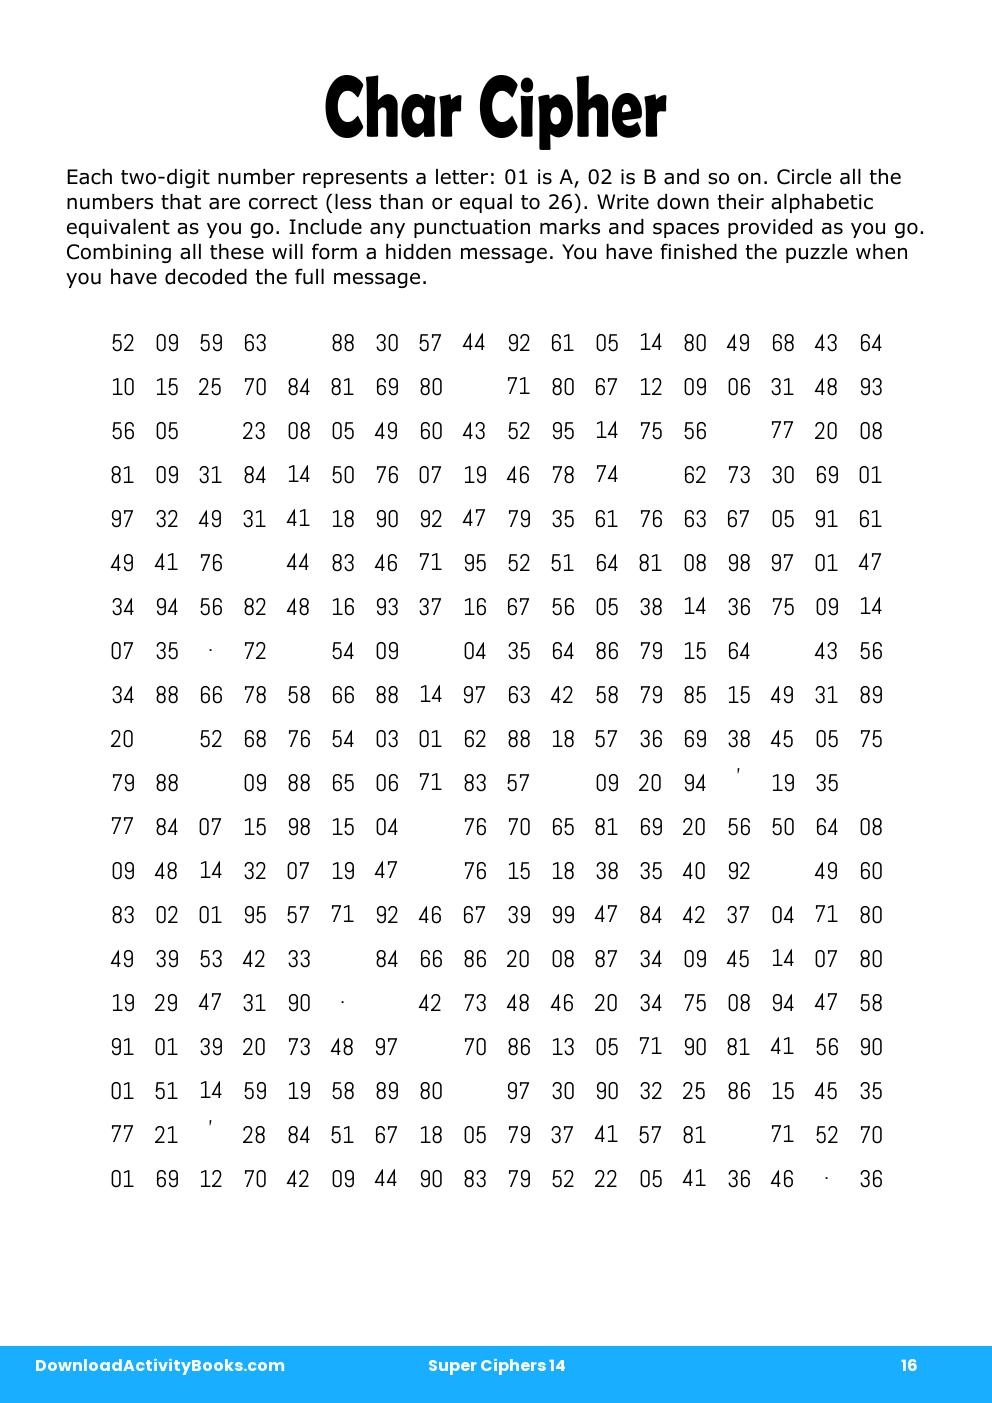 Char Cipher in Super Ciphers 14